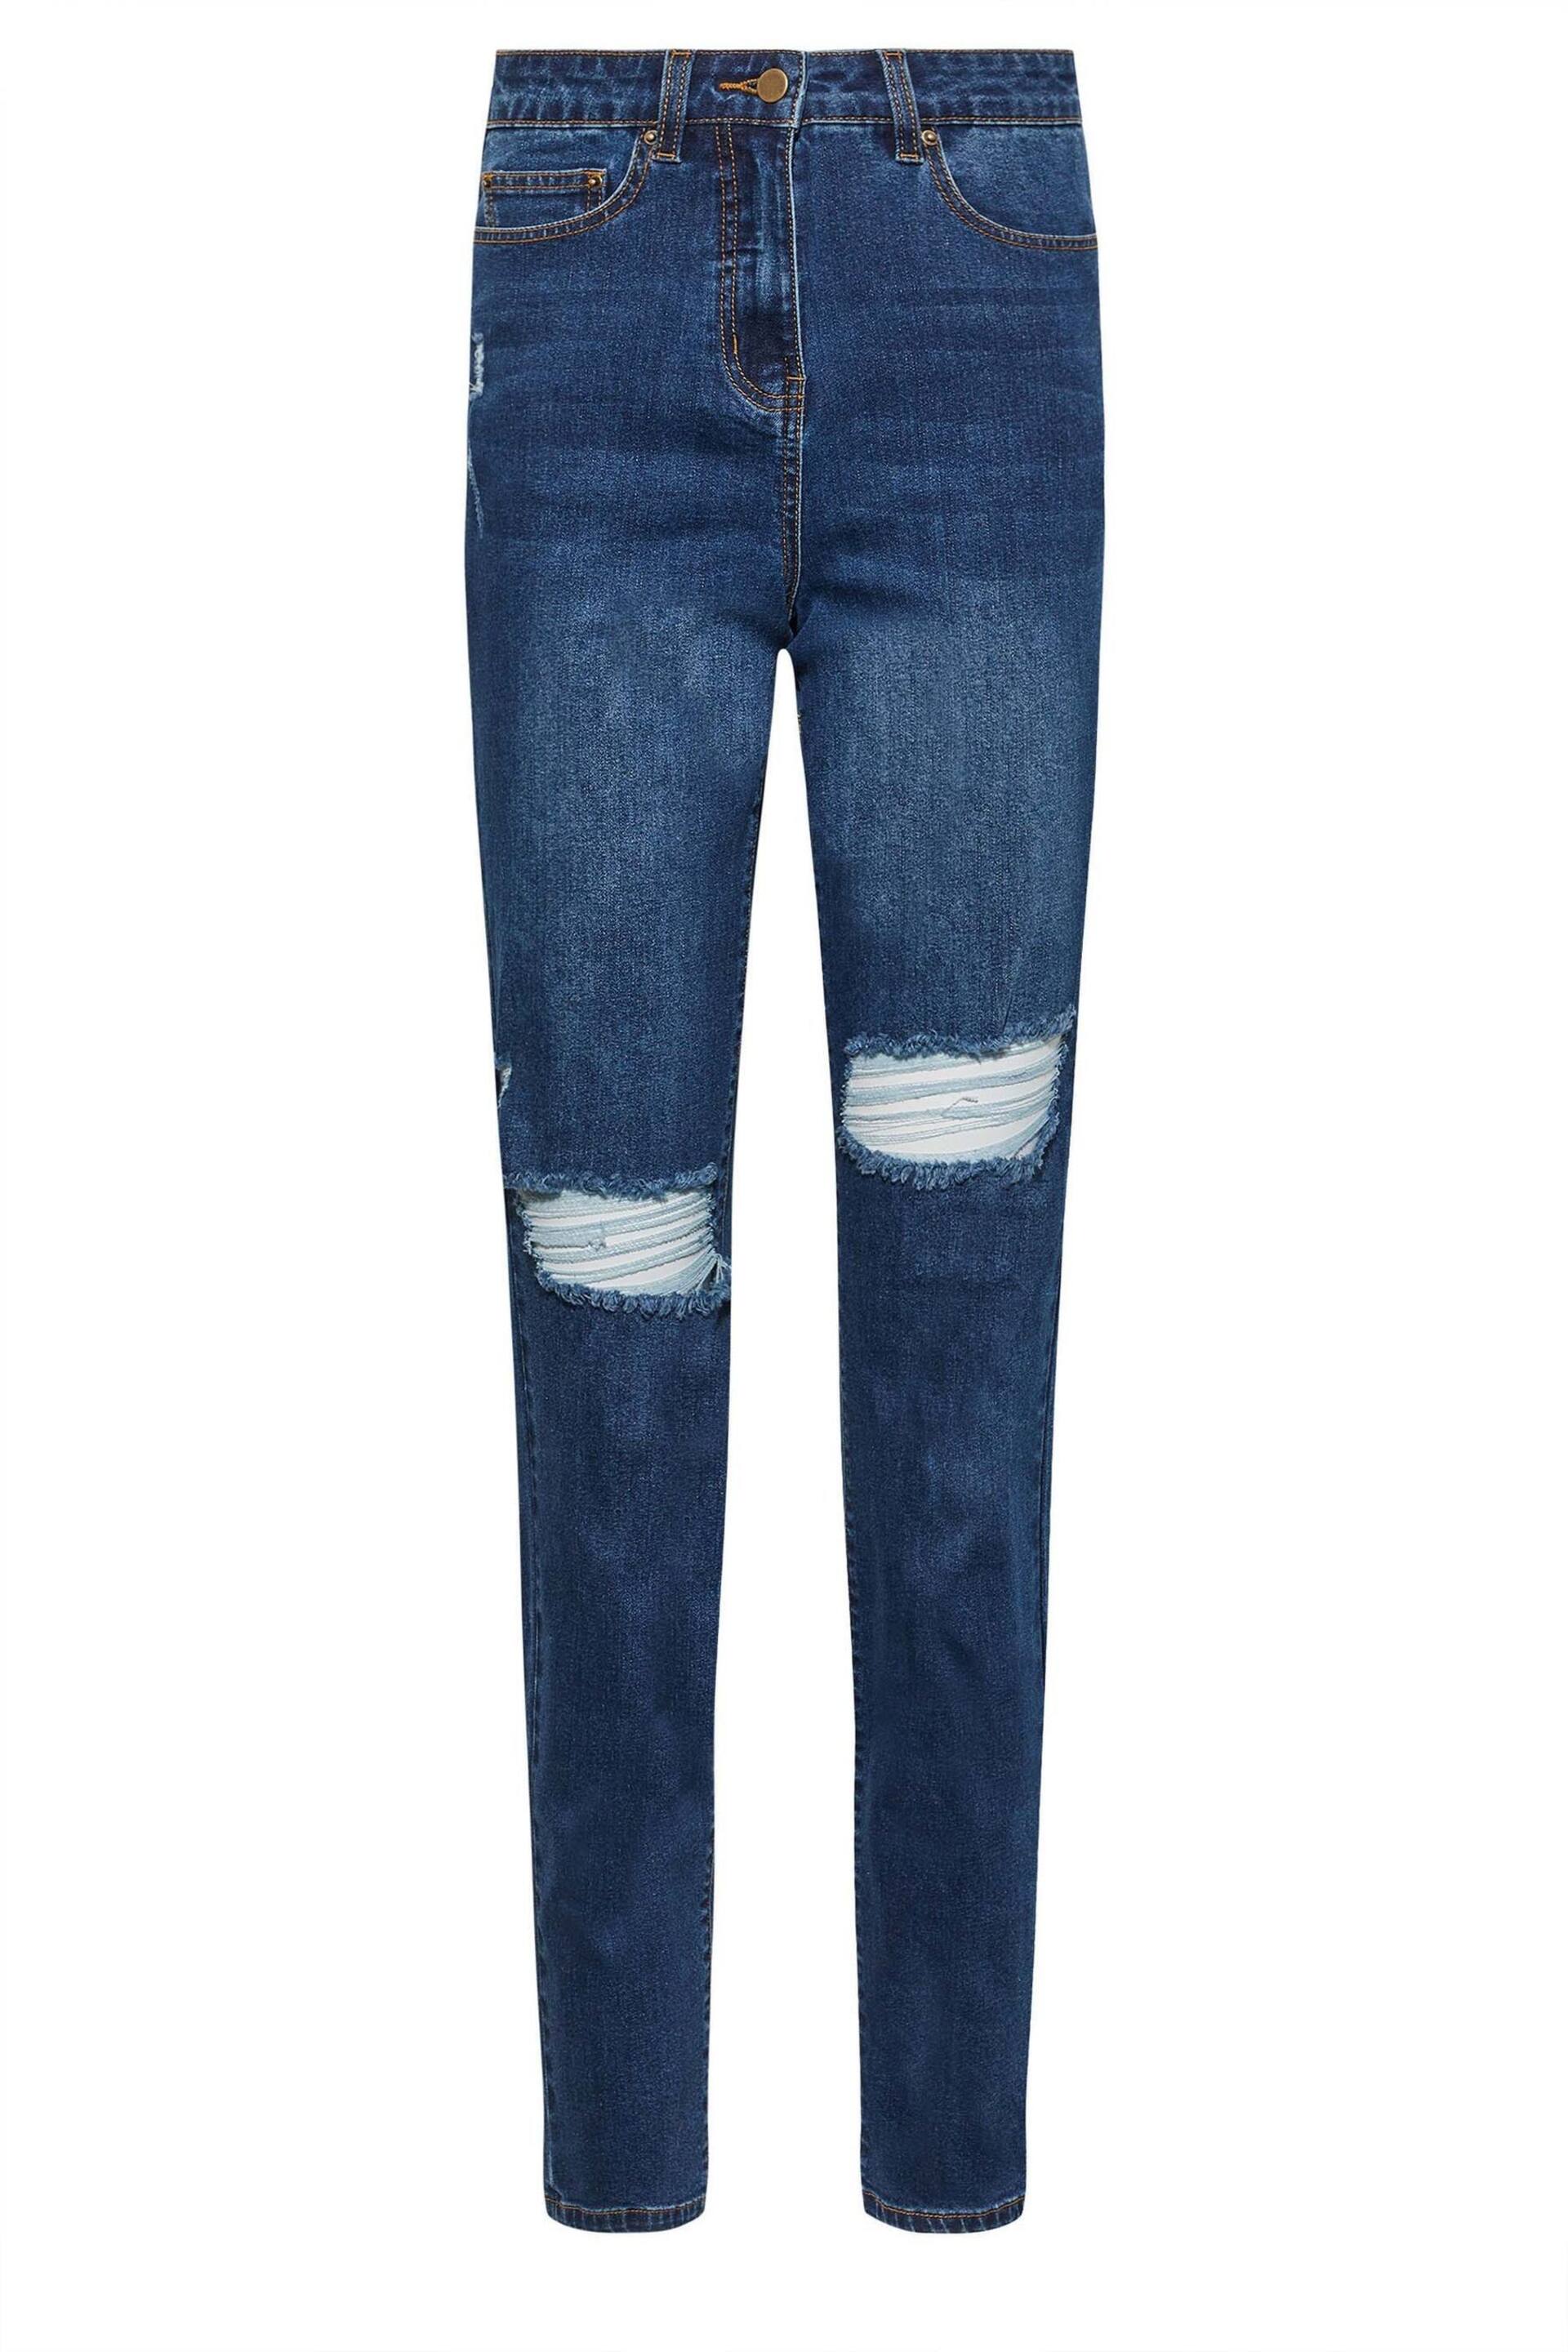 Long Tall Sally Blue UNA Stretch Mom Jeans - Image 3 of 4